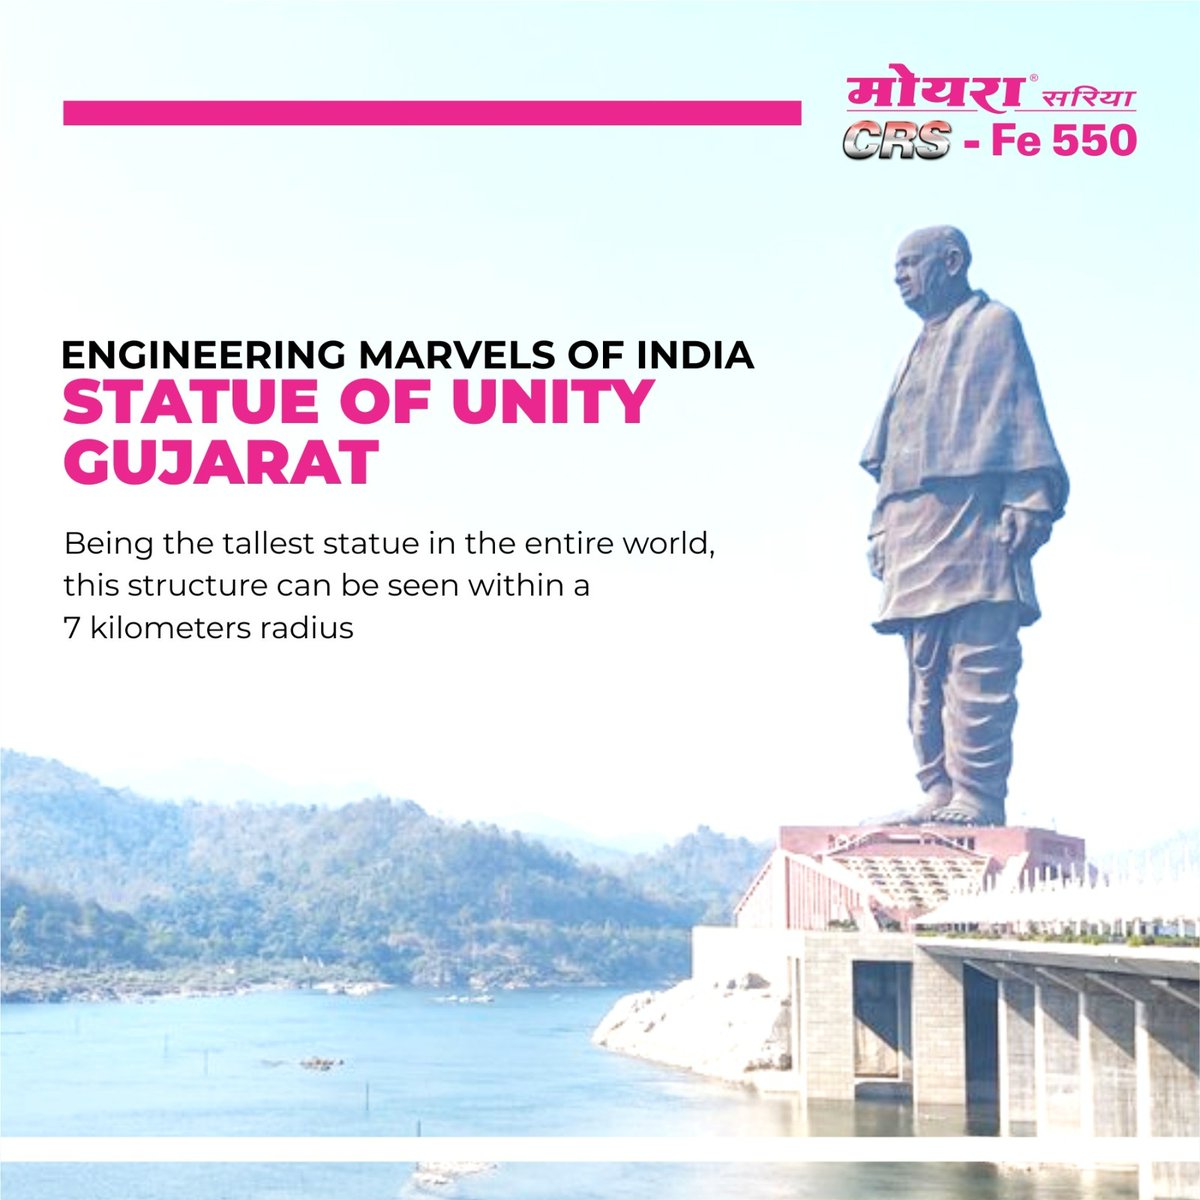 Marvel at the engineering prowess of India with Moira Sariya! The Statue of Unity in Gujarat stands as a towering testament to innovation, visible from a remarkable 7 km radius. Discover the pride of Indian architecture.
#MoiraSariya #EngineeringMarvels #StatueOfUnity